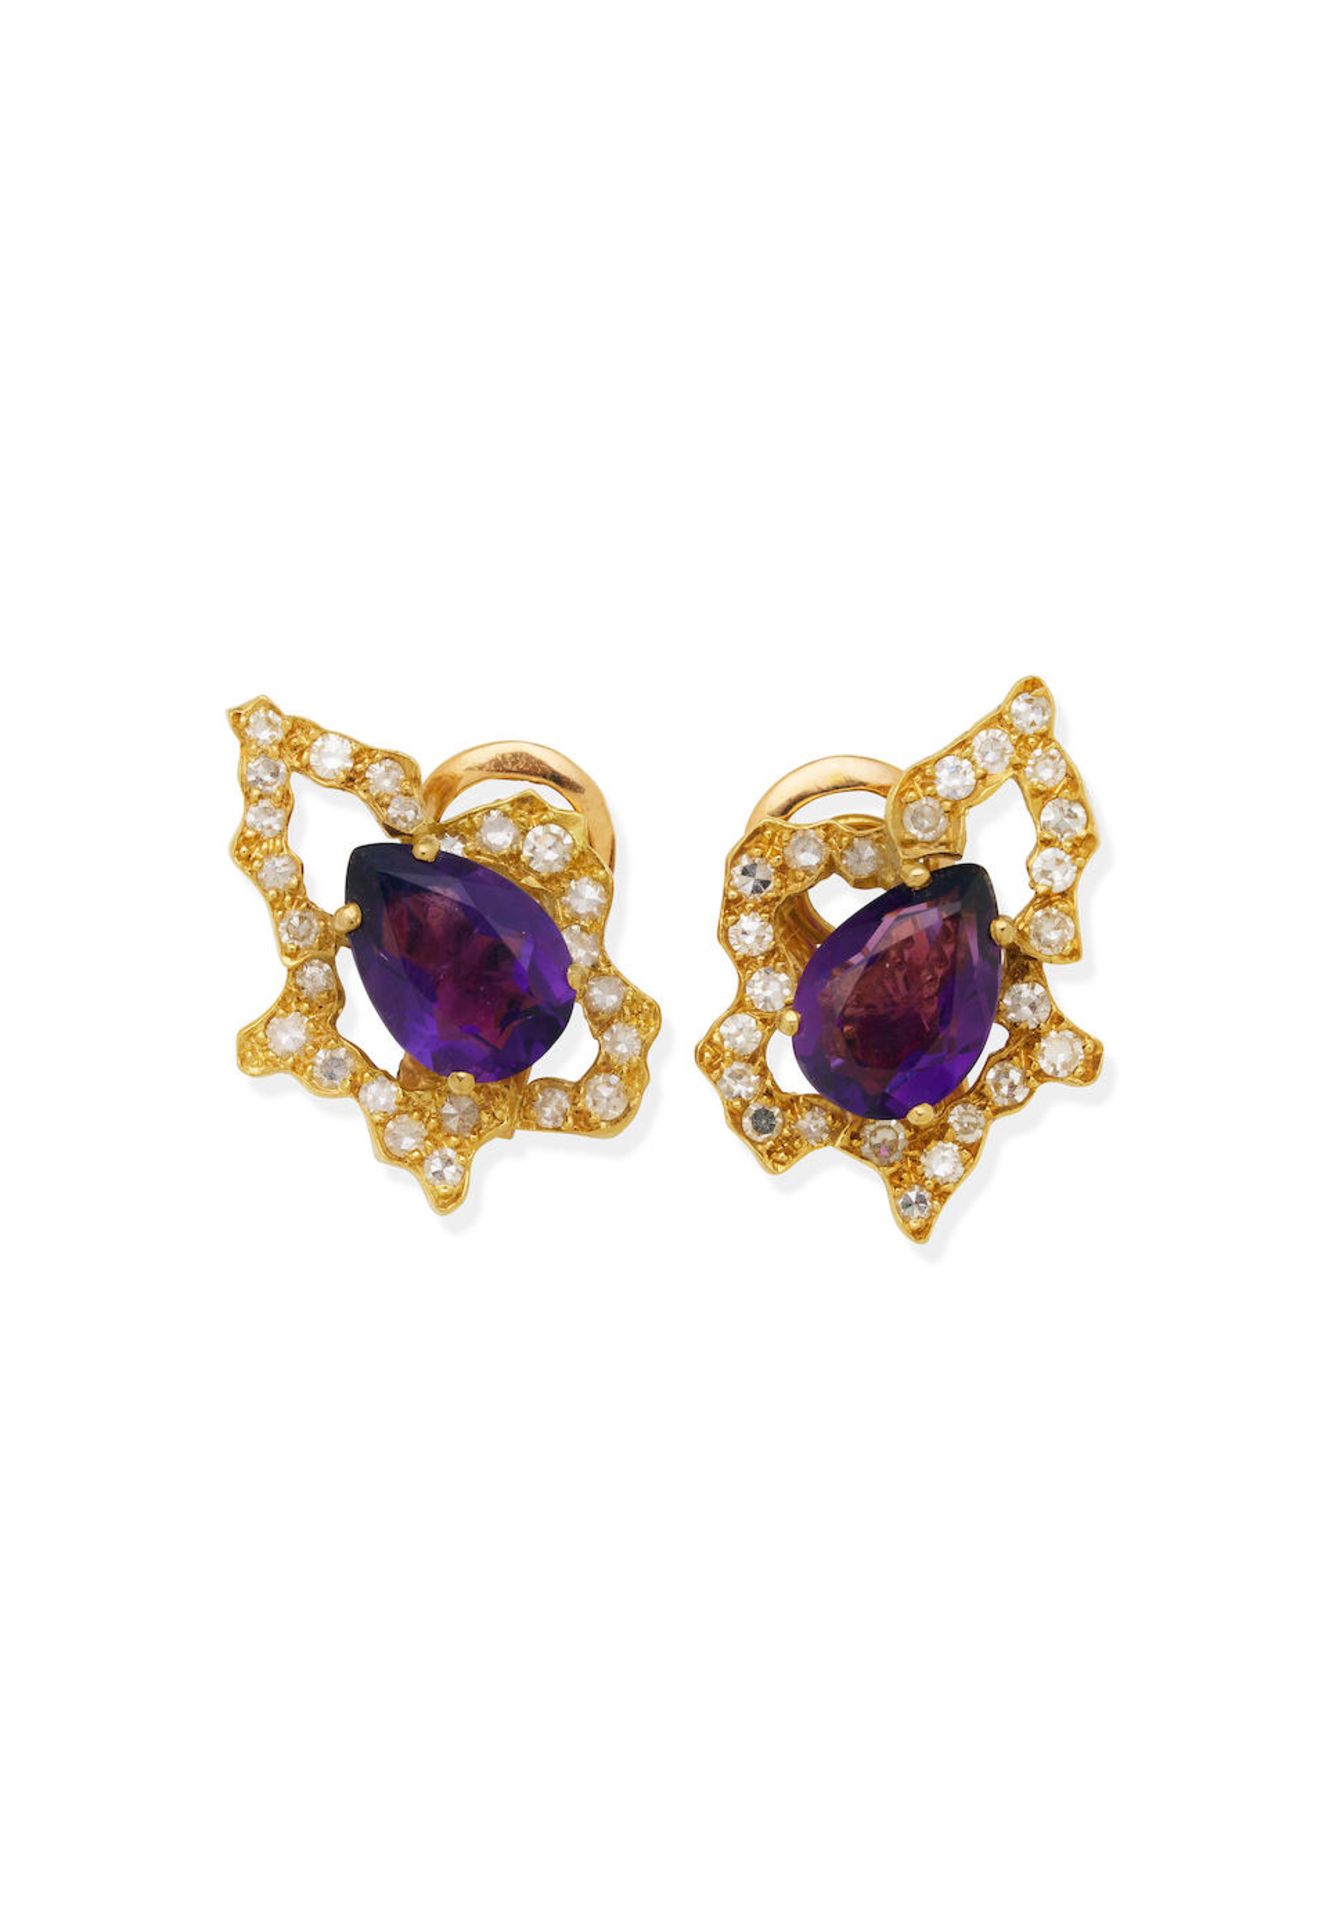 ANDREW GRIMA | PAIR OF AMETHYST AND DIAMOND EARCLIPS, Circa 1967